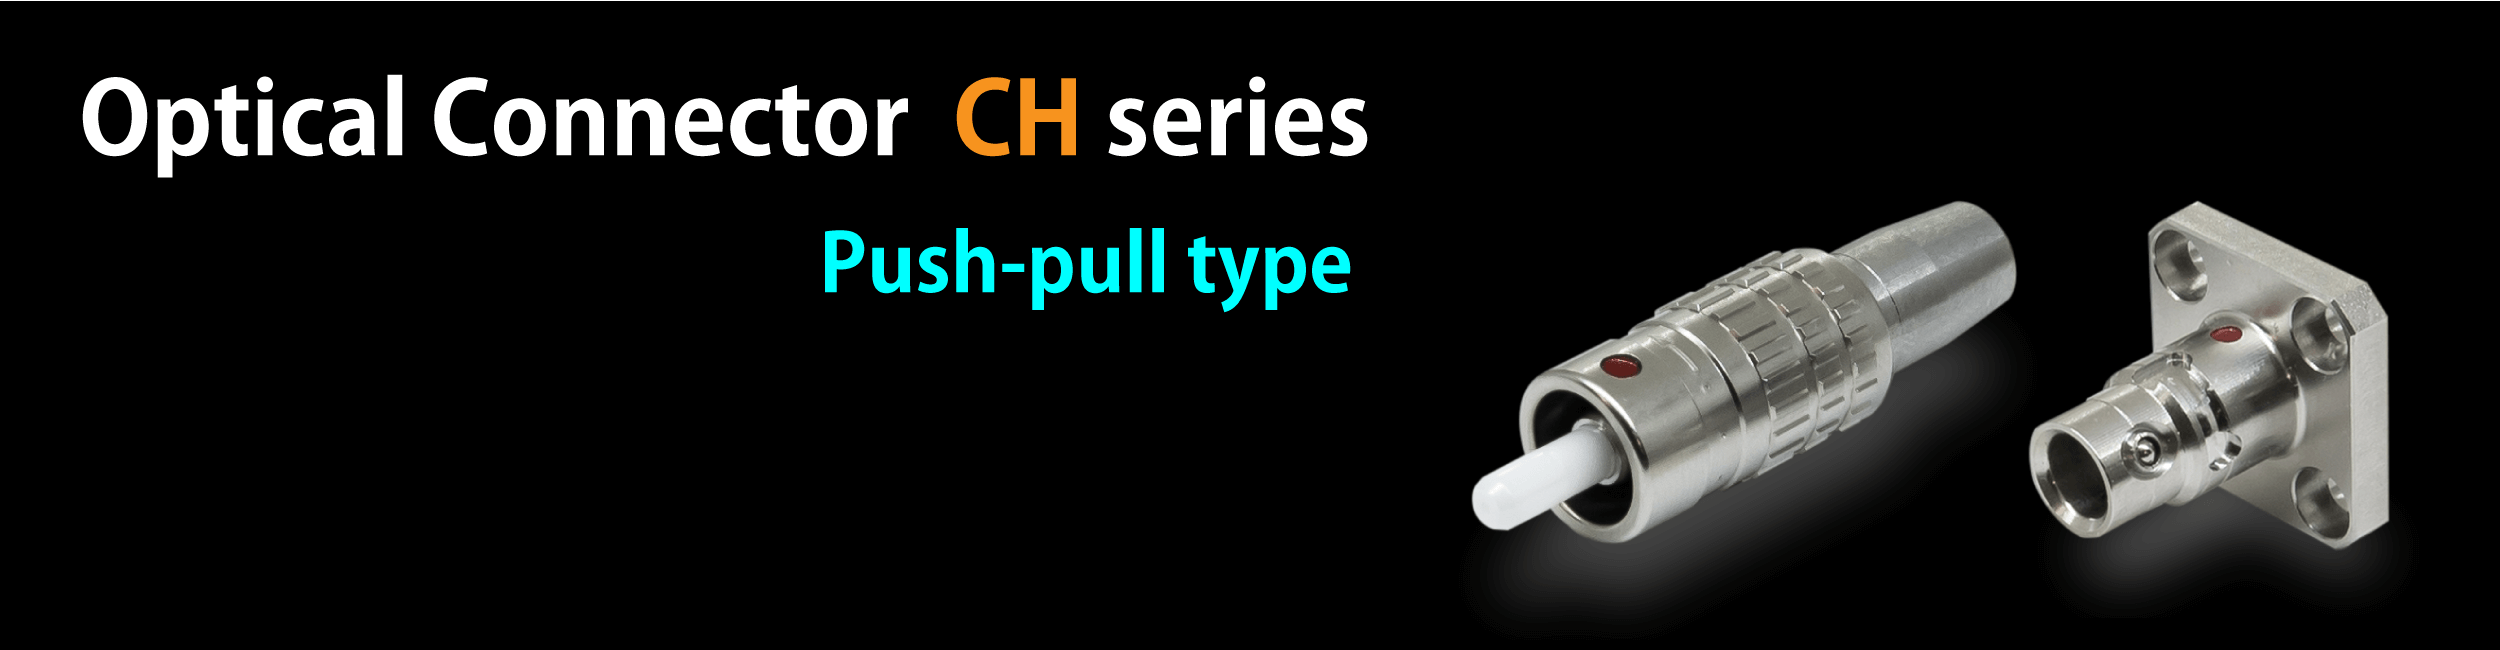 Optical-connector Push-pull